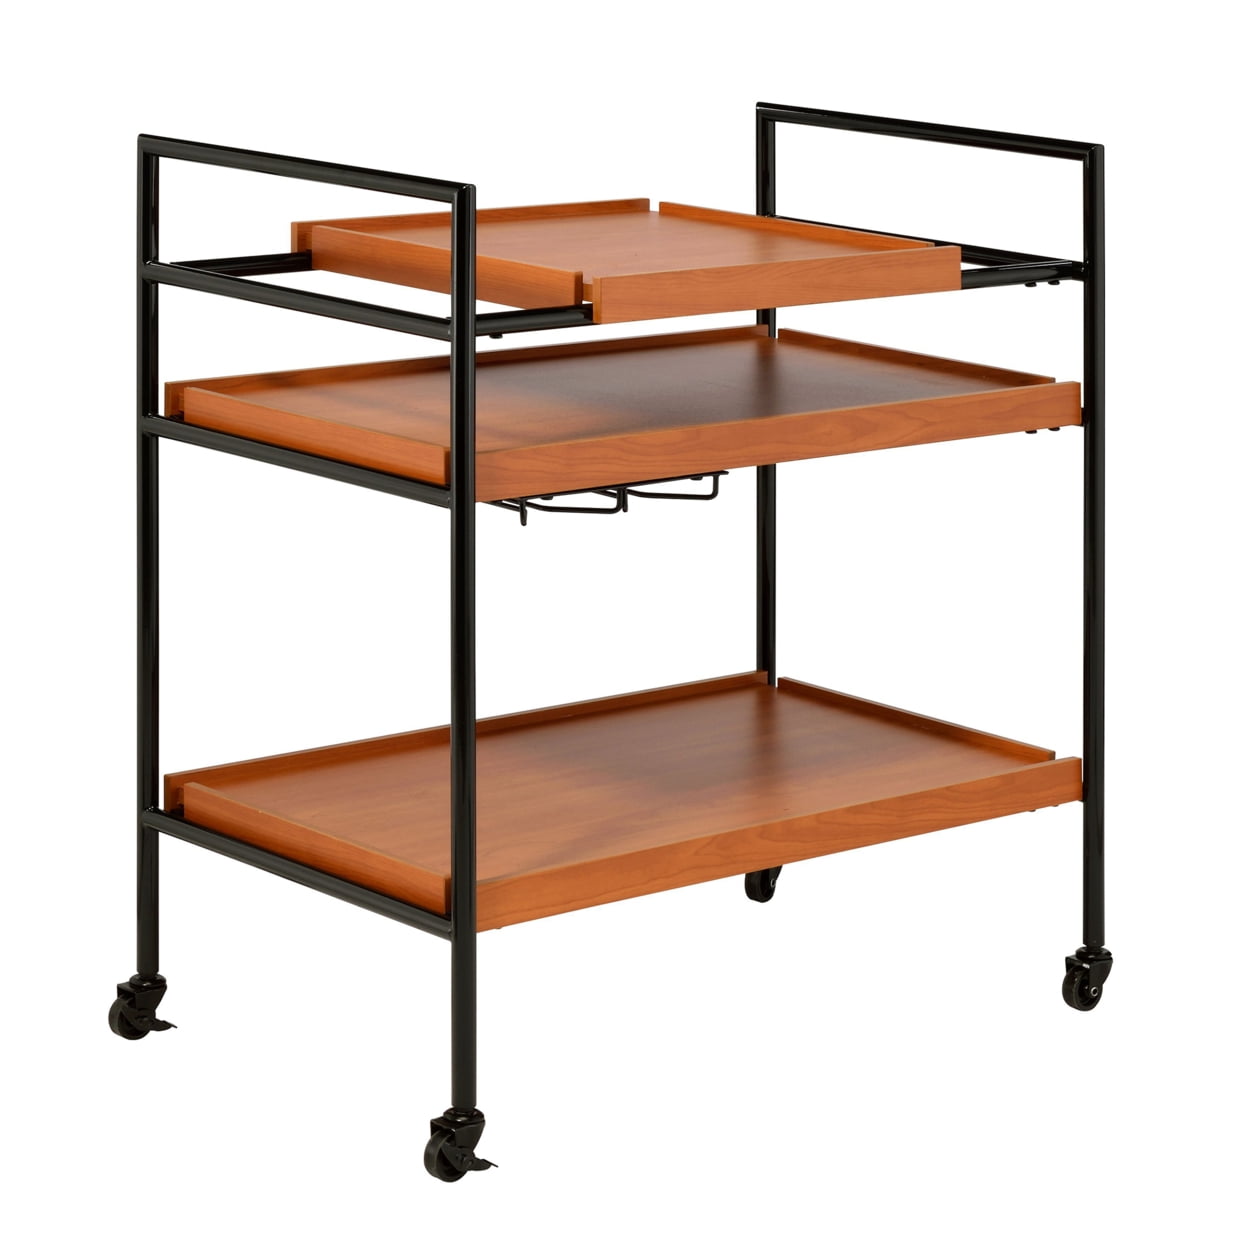 Picture of Benjara BM211124 Metal Frame Serving Cart with Adjustable Compartments - Oak Brown & Black - 33 x 14 x 29 in.